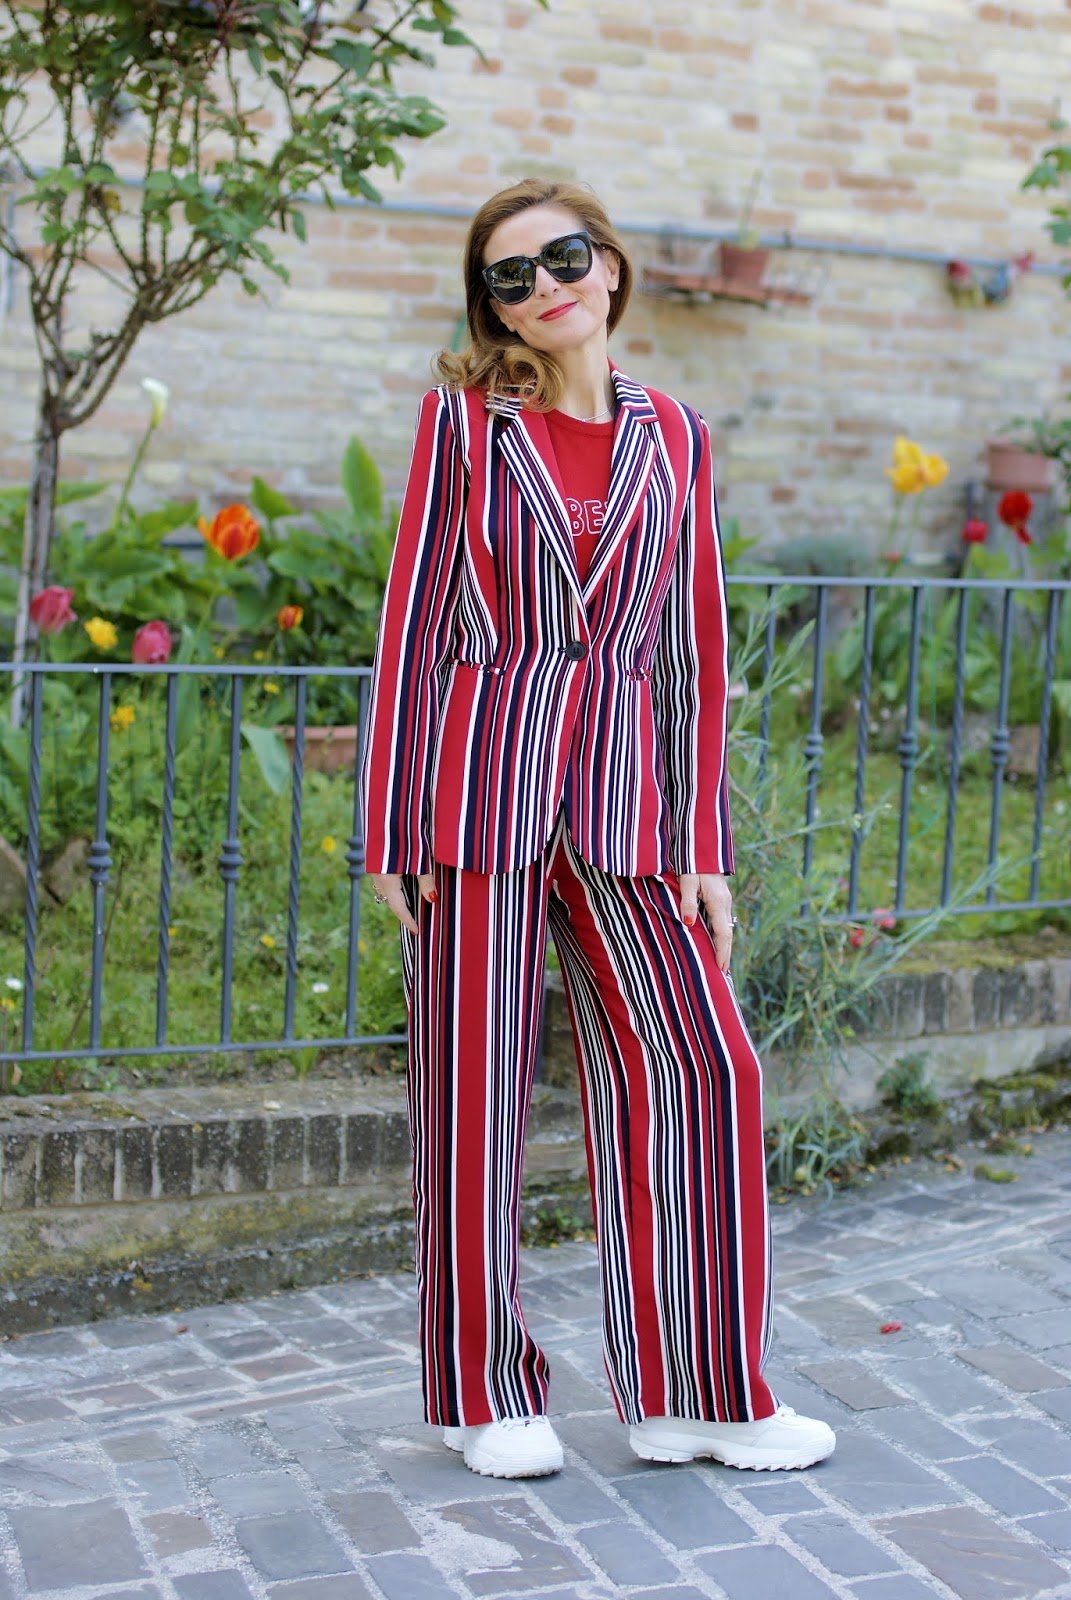 Suit up! A striped suit worn with sneakers on Fashion and Cookies fashion blog, fashion blogger style